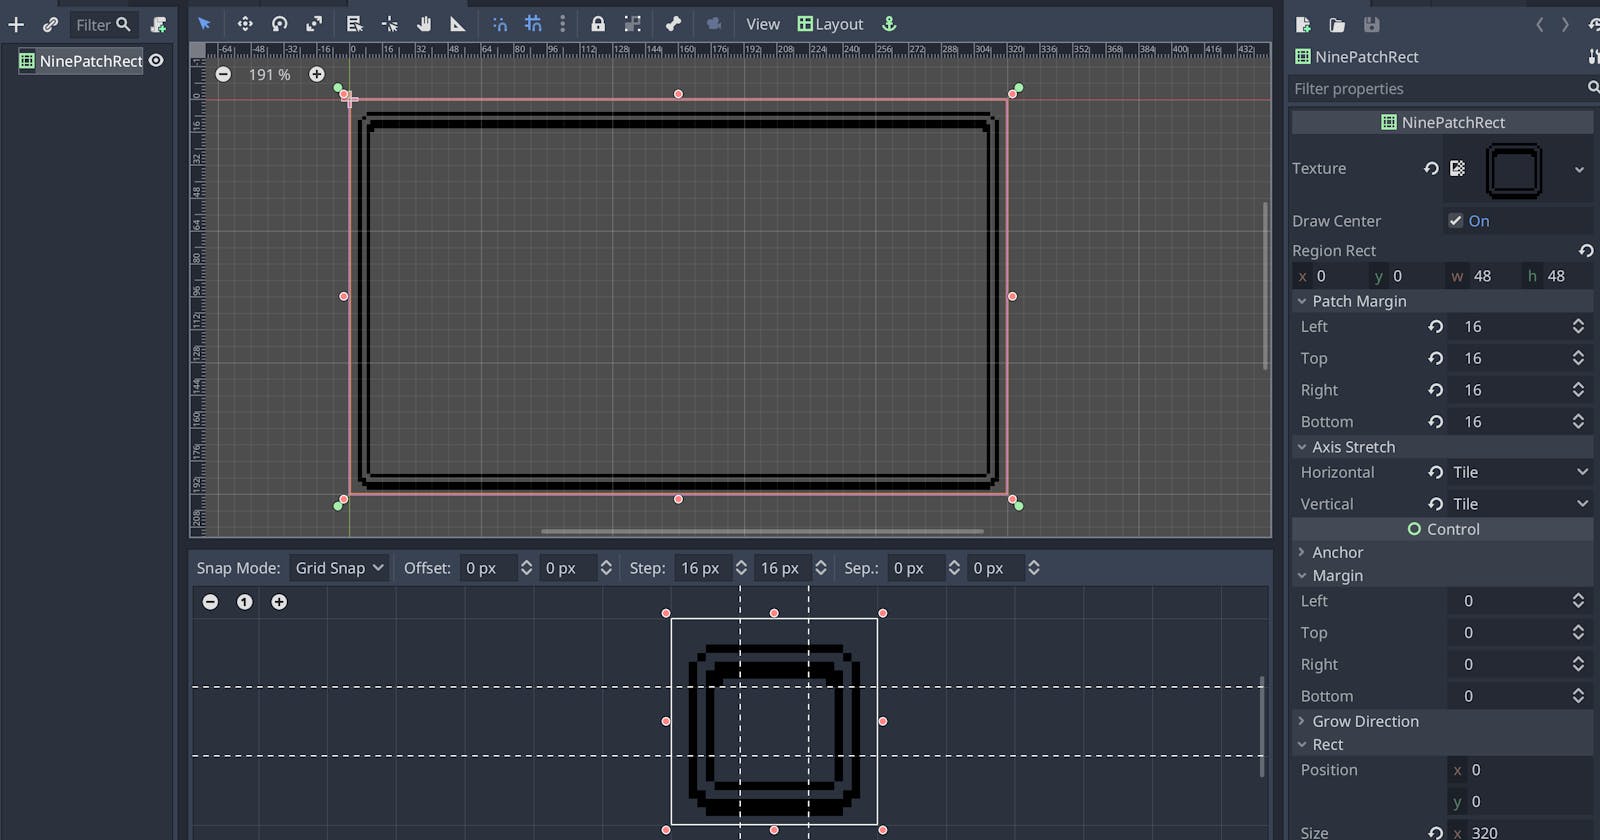 How to use tiles for your dialog box borders in Godot: The NinePatchRect component